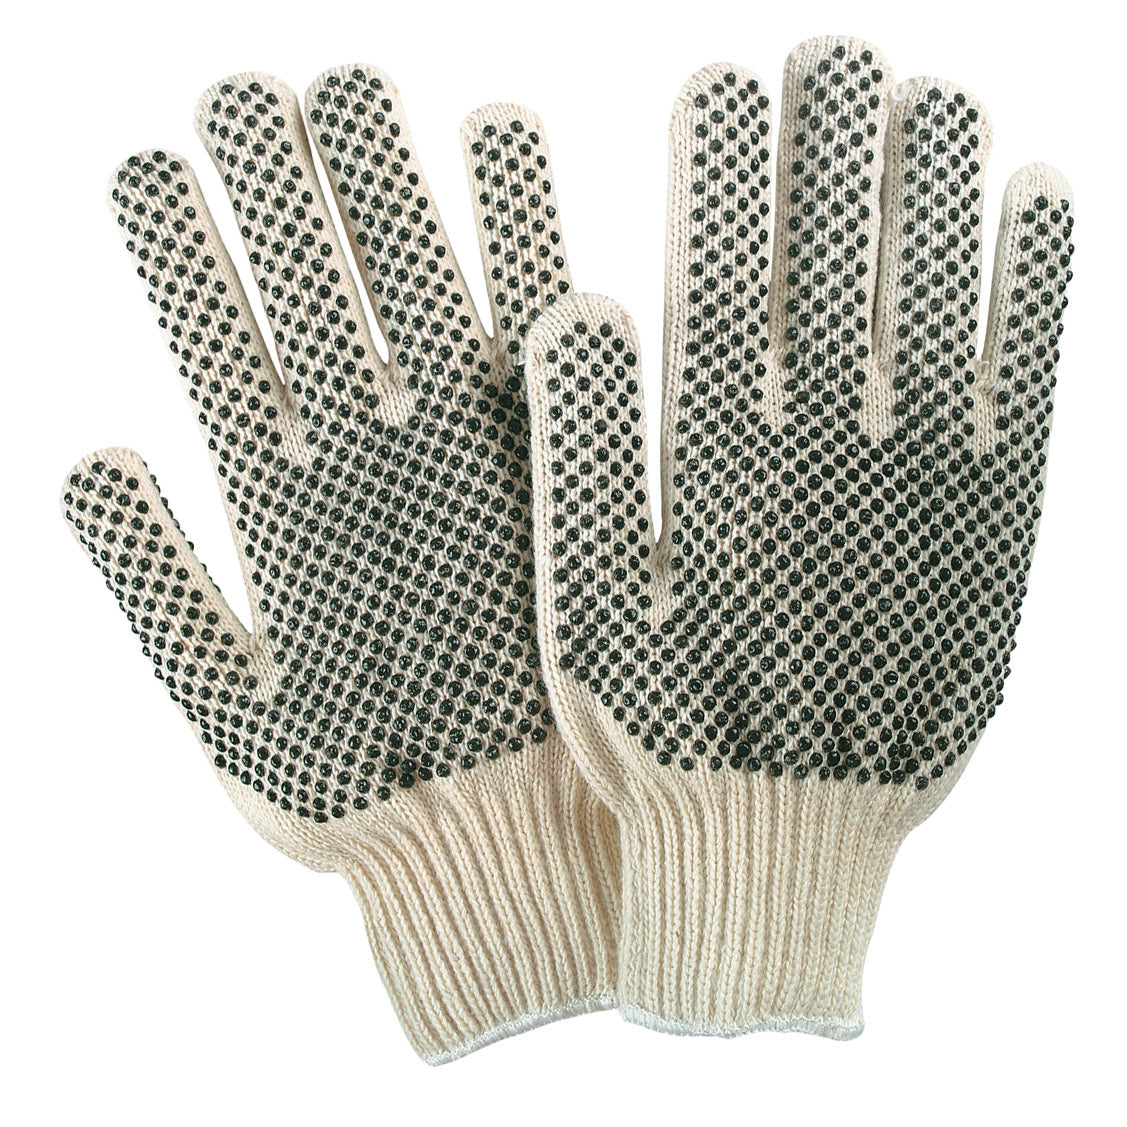 PVC Dot Knit Gloves - Large - Long Island Gloves, Long Island Safety  Supplies - 631-524-5444